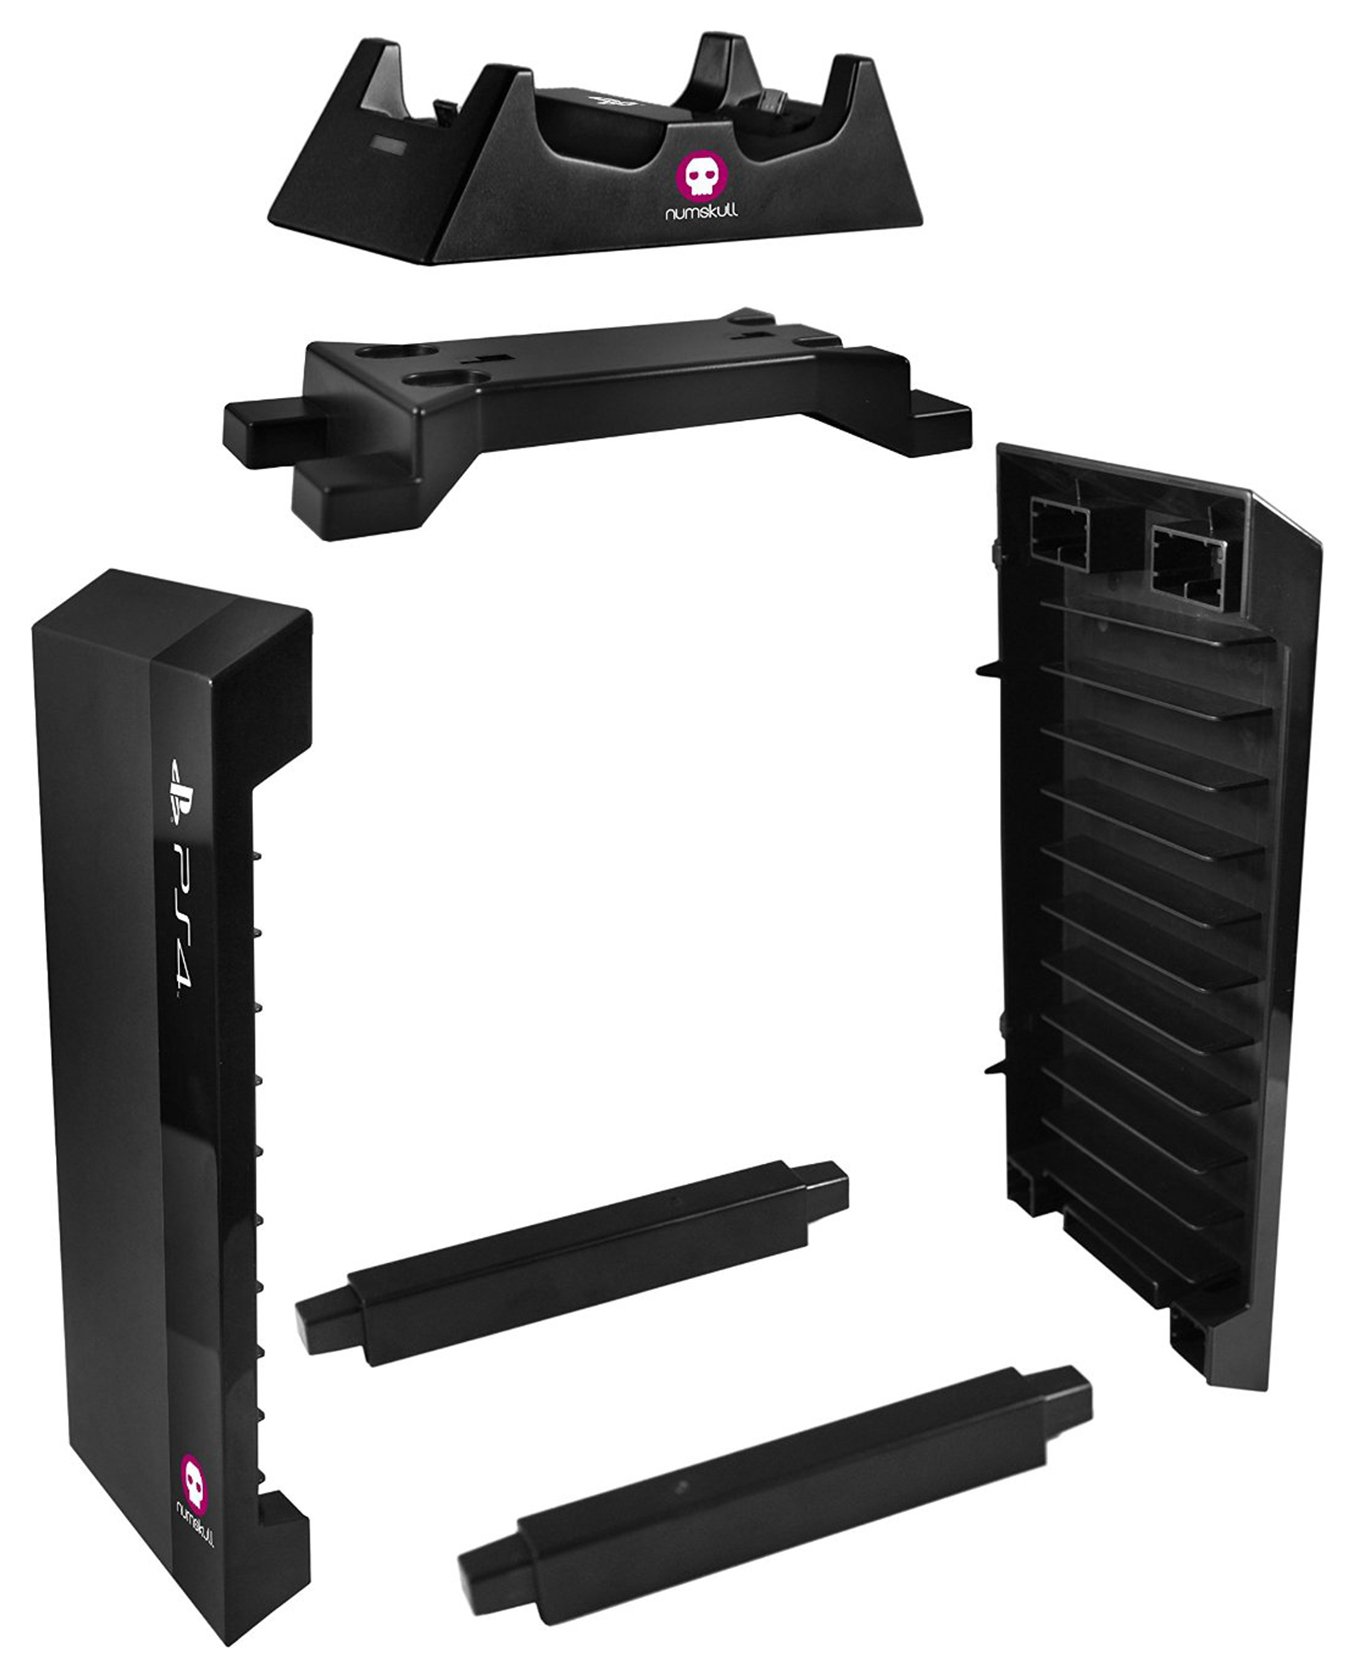 ps4 charging station and games tower